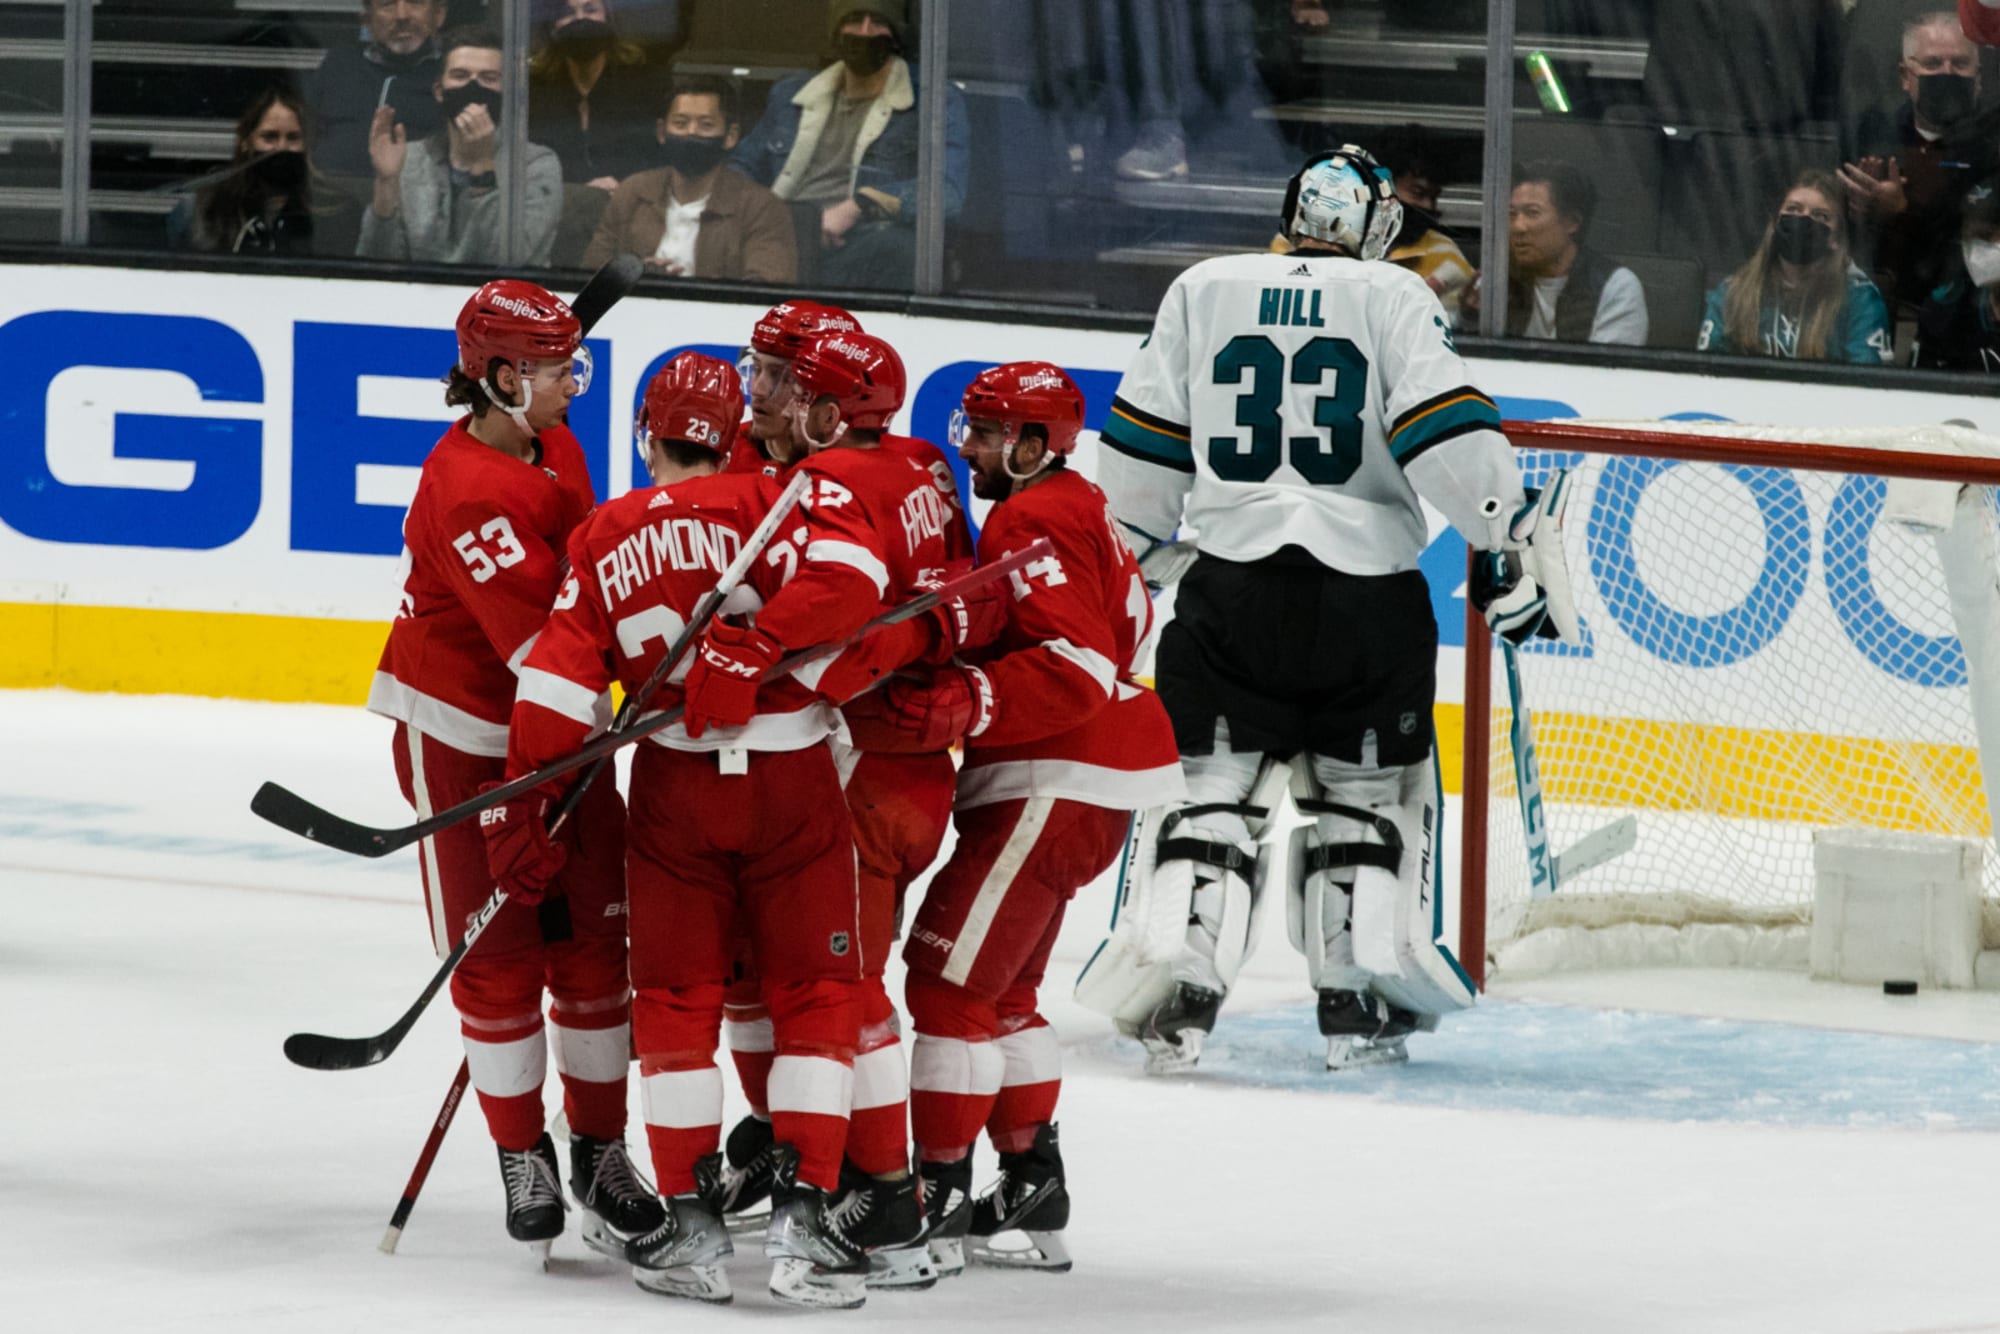 Detroit Red Wings vs. Sharks Game 46 Preview, Prediction, Odds